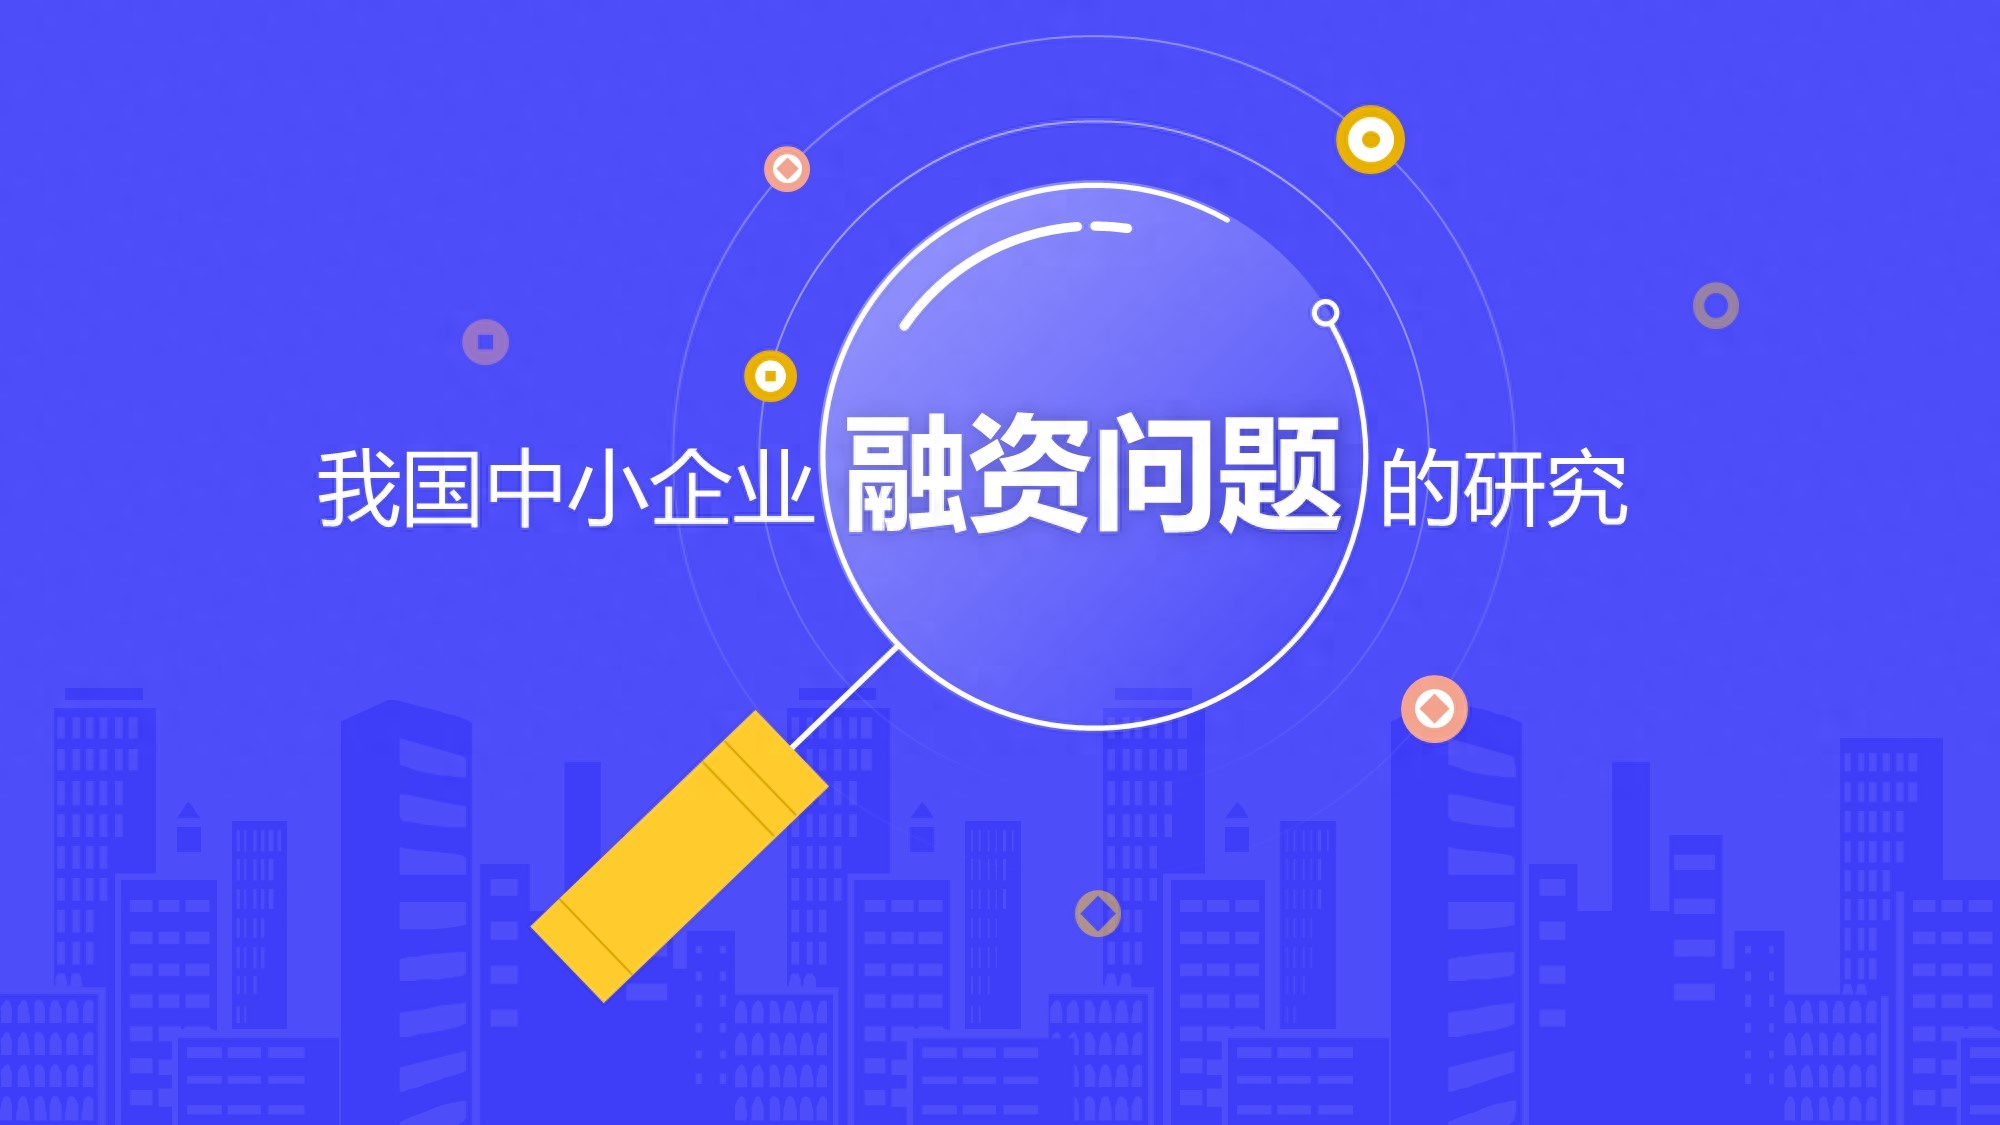 How to design a PPT cover? PPT masters summarized 9 ideas, which are used by Tencent poster designers